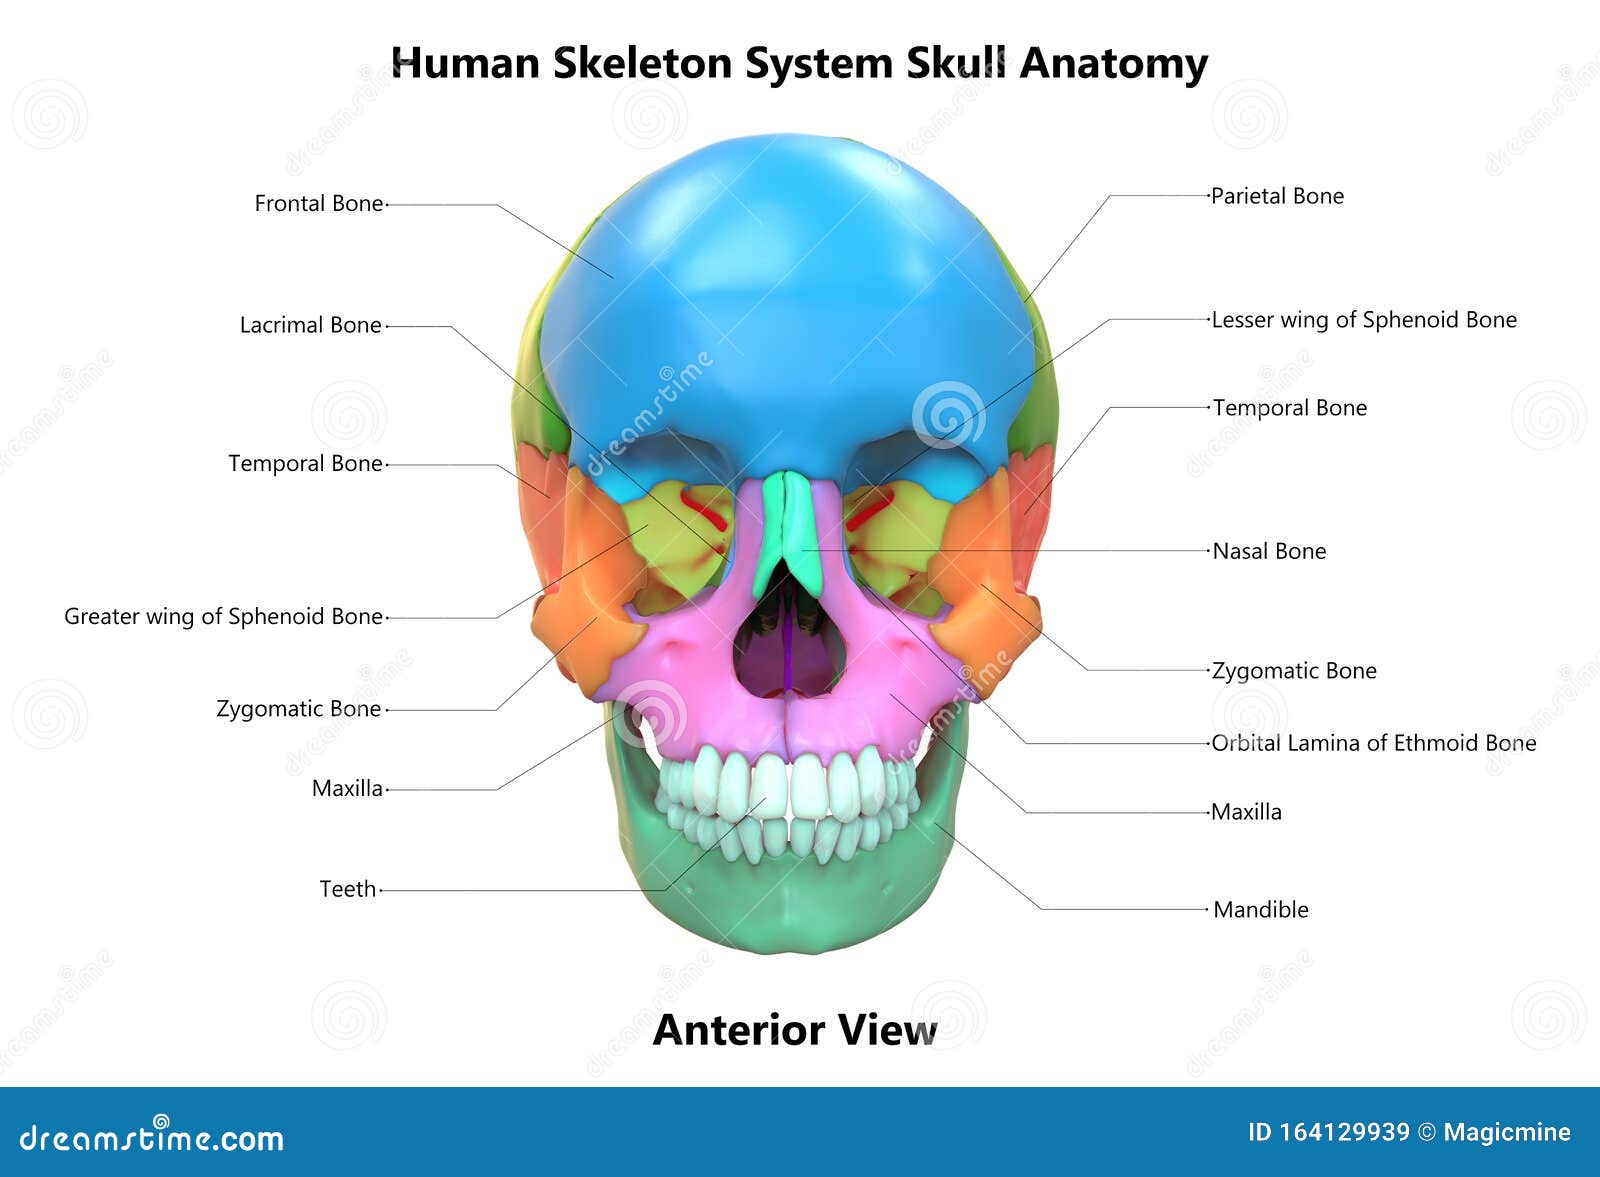 Skull Of Human Skeleton System Anatomy With Detailed Labels Anterior